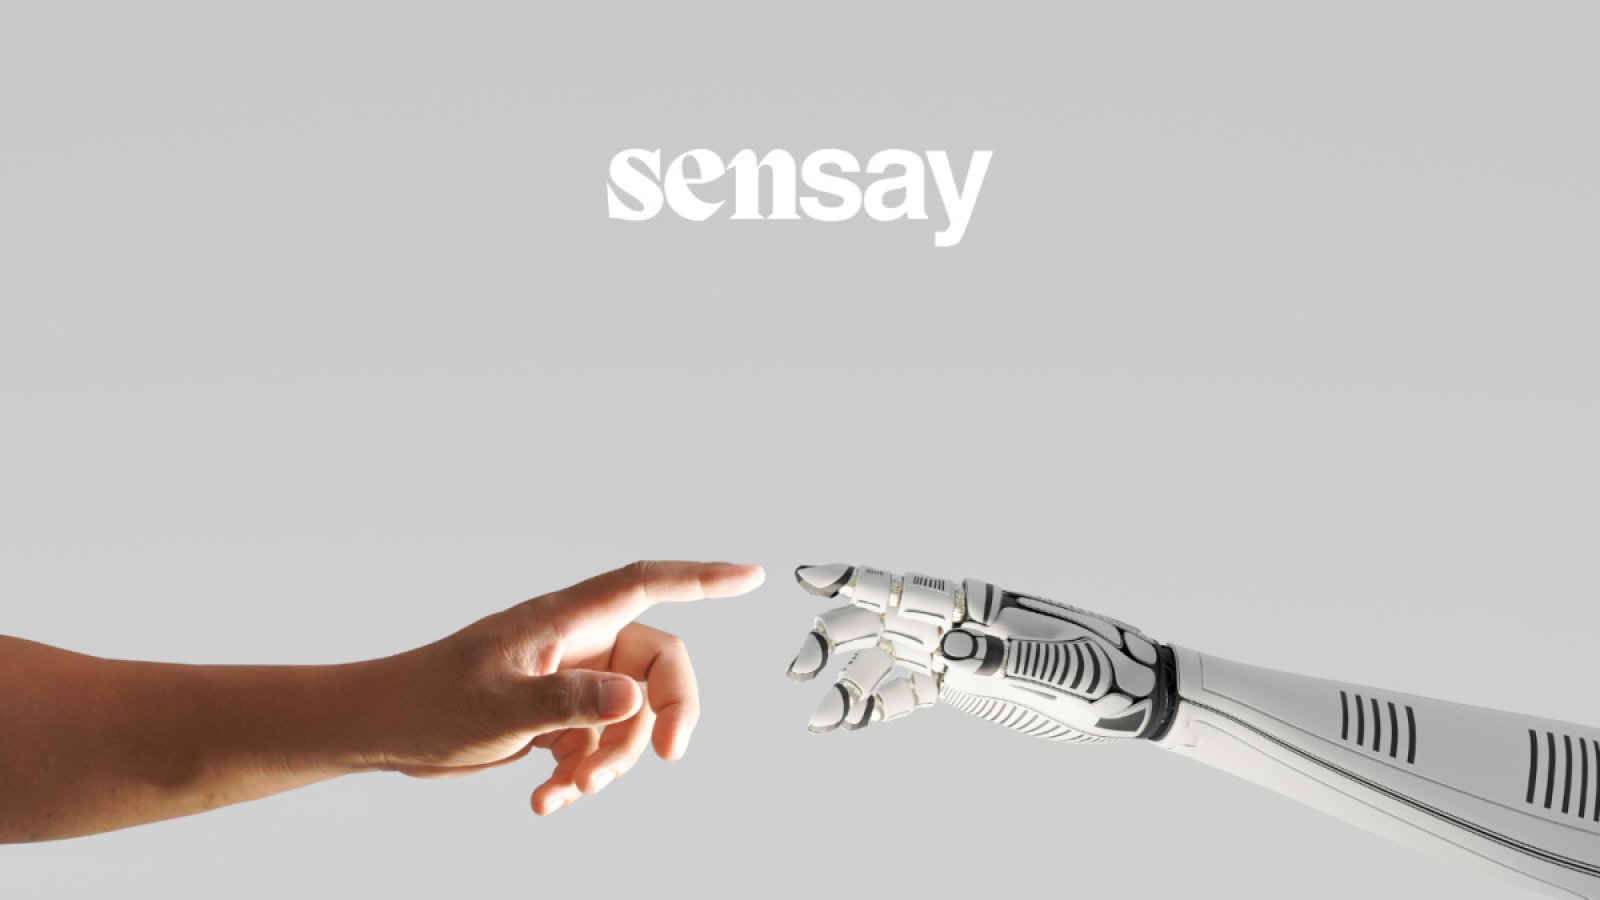 Sensay Secures $3 Million in Groundbreaking Public Sale, Outshining Competitors with Launch of $SNSY Token